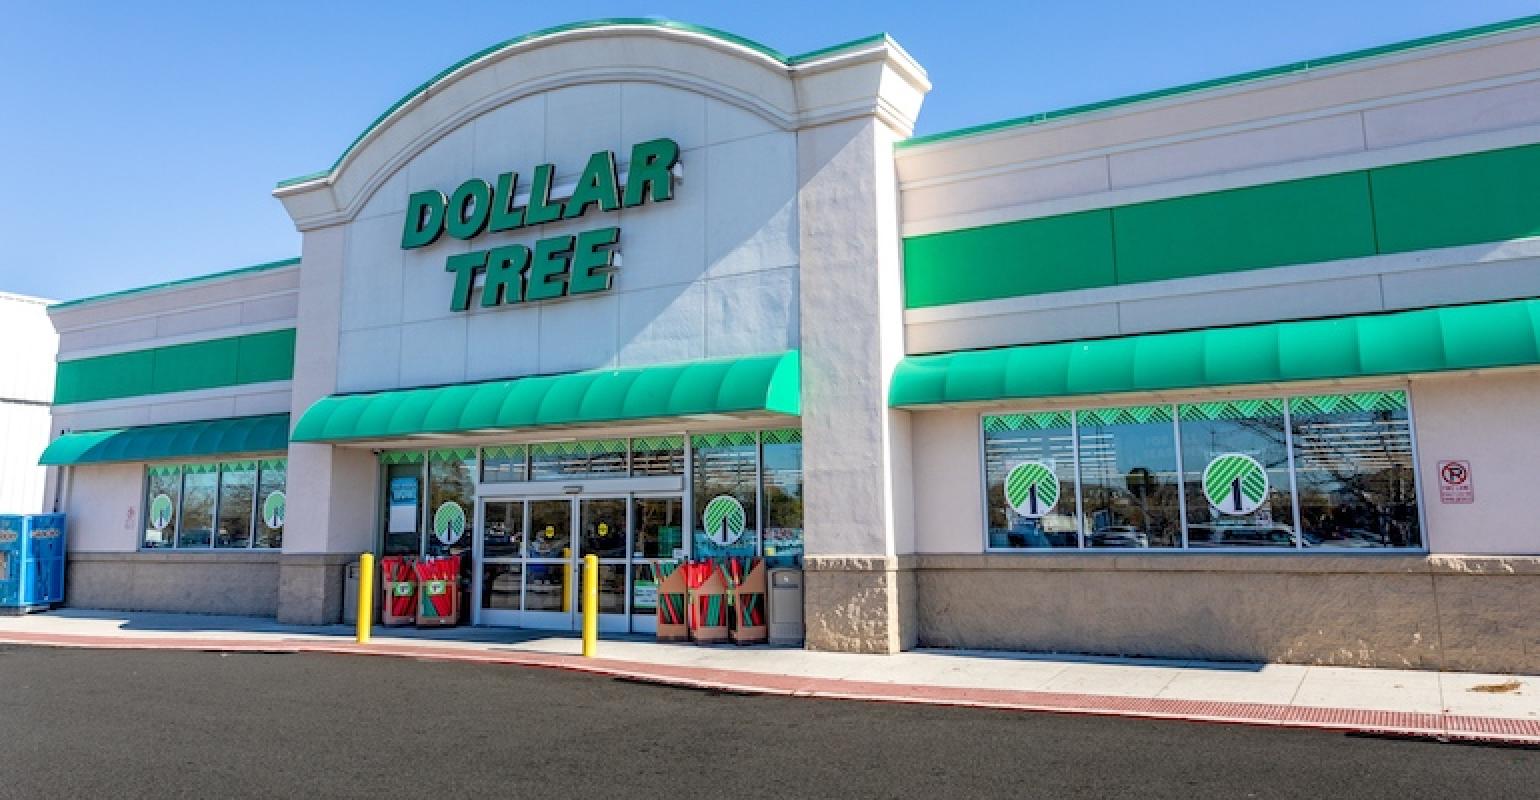 What Is Dollar Tree? When Does Dollar Tree Close & Open? - Newtechniqueinfo